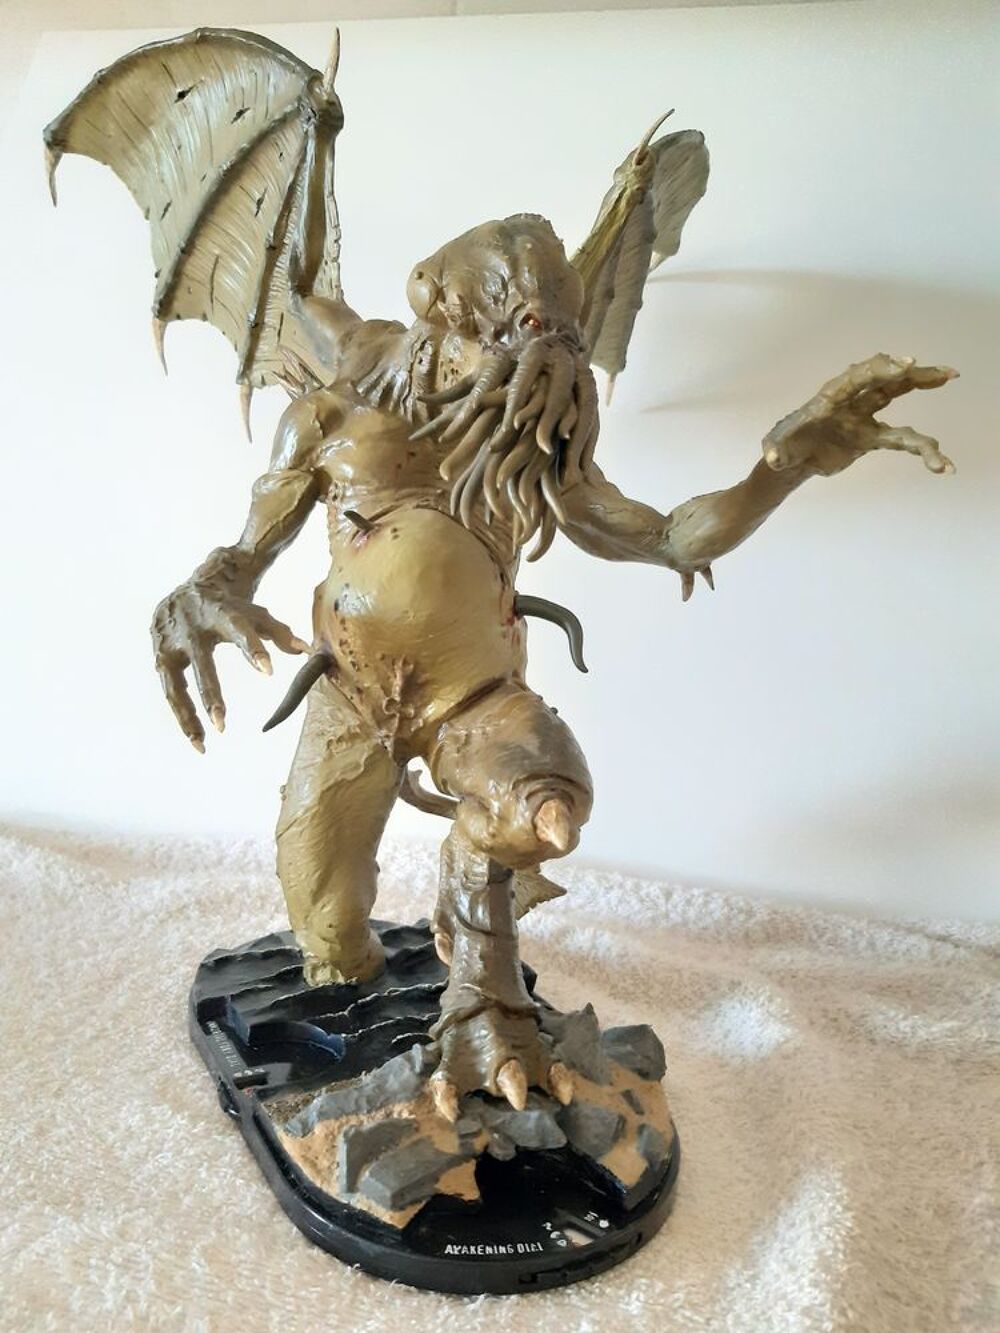 Horrorclix The great cthulhu figurine 